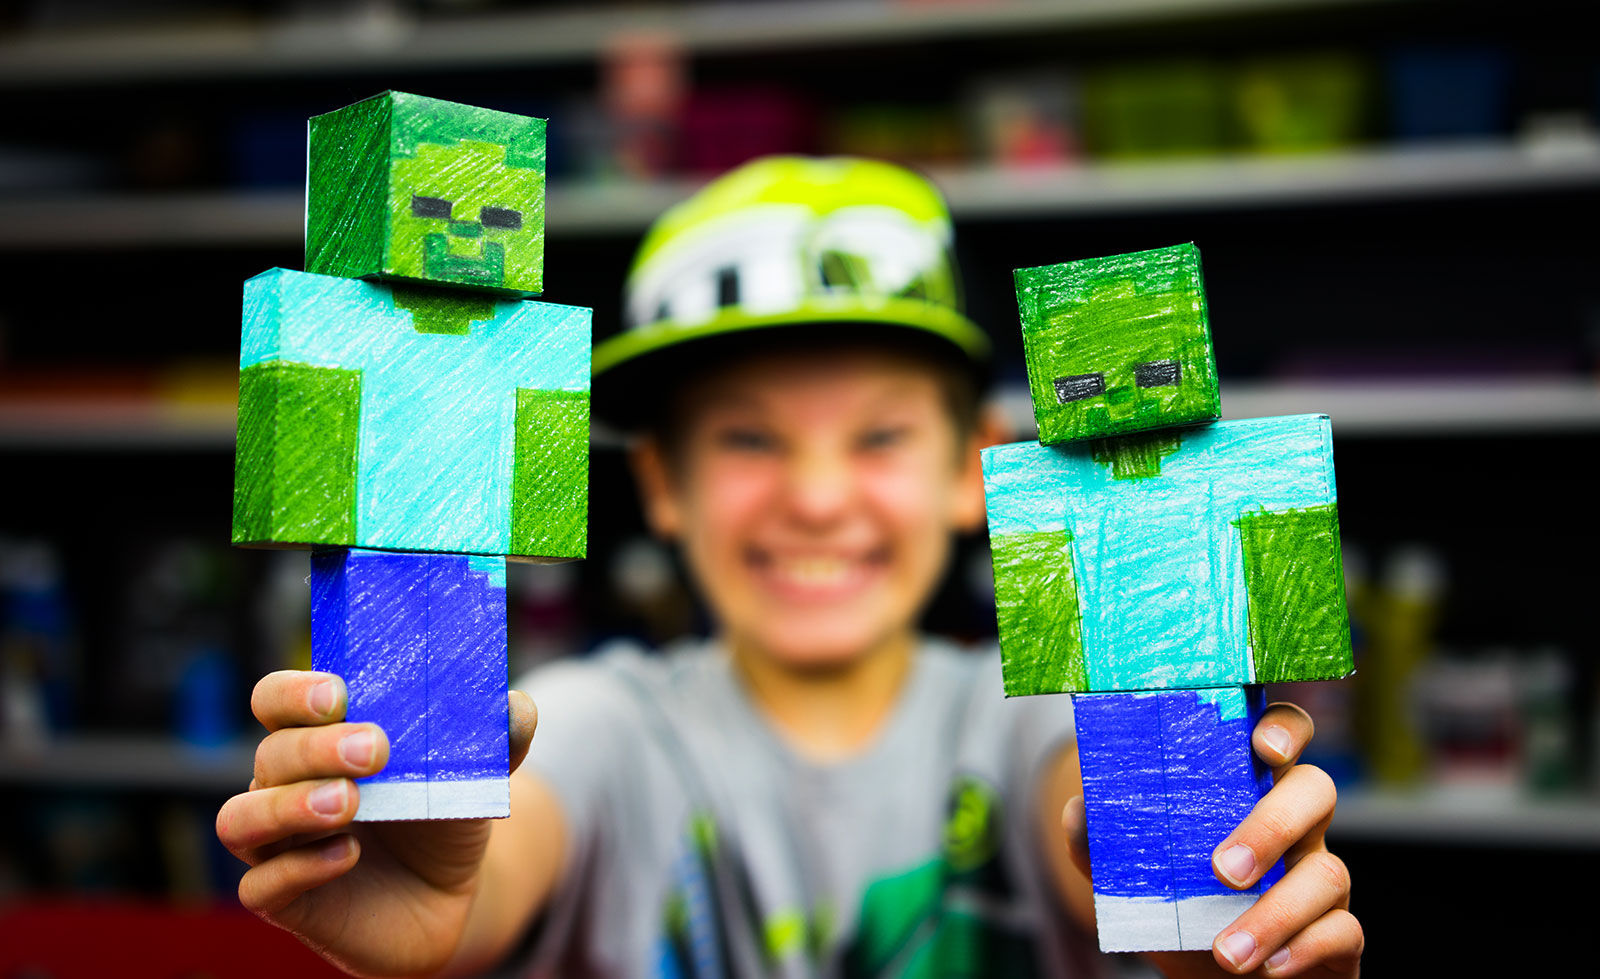 How To Make A Minecraft Zombie - Art For Kids Hub